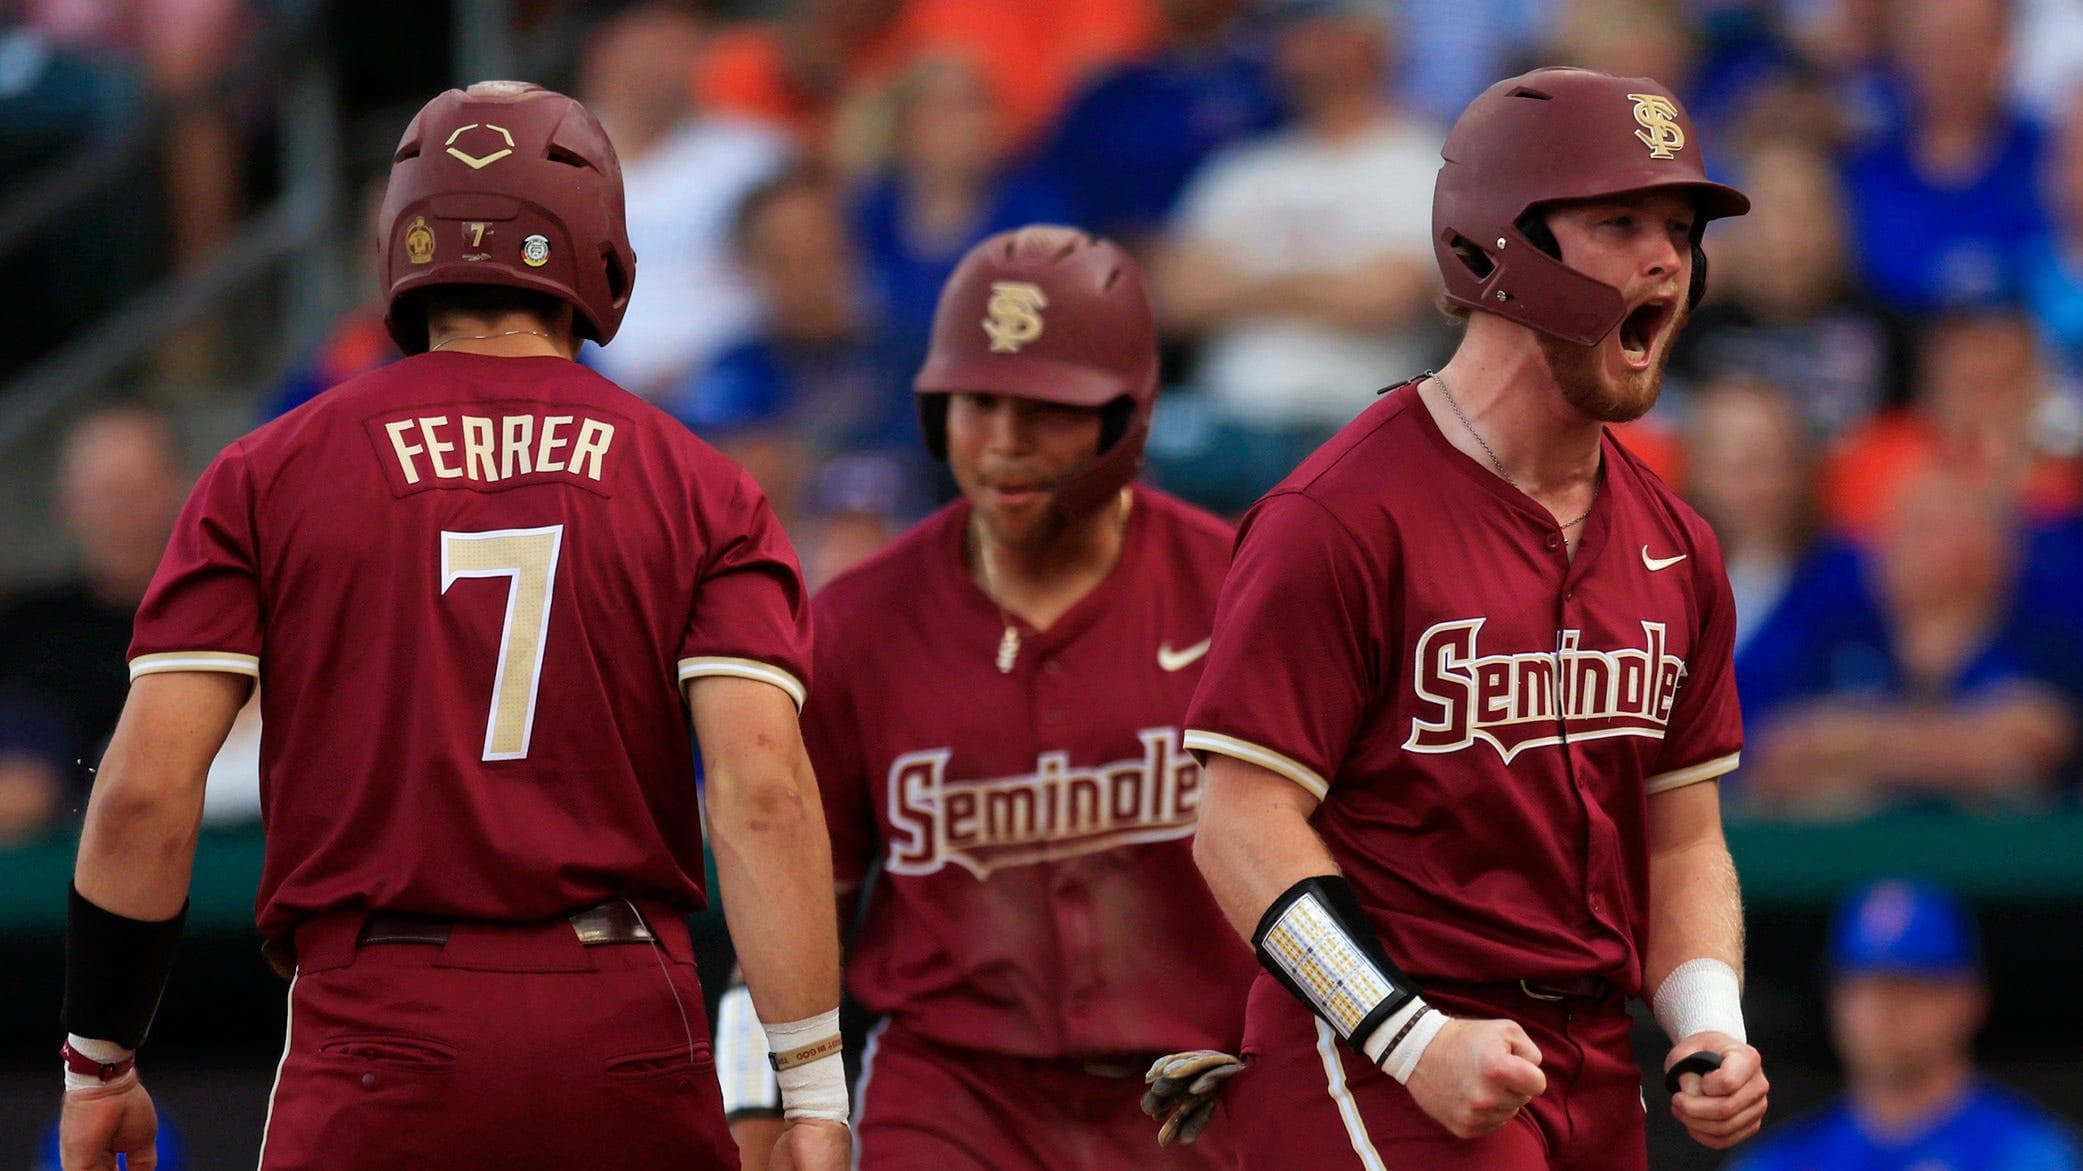 ACC Baseball Standings: Tigers Lead, Florida State Close Behind